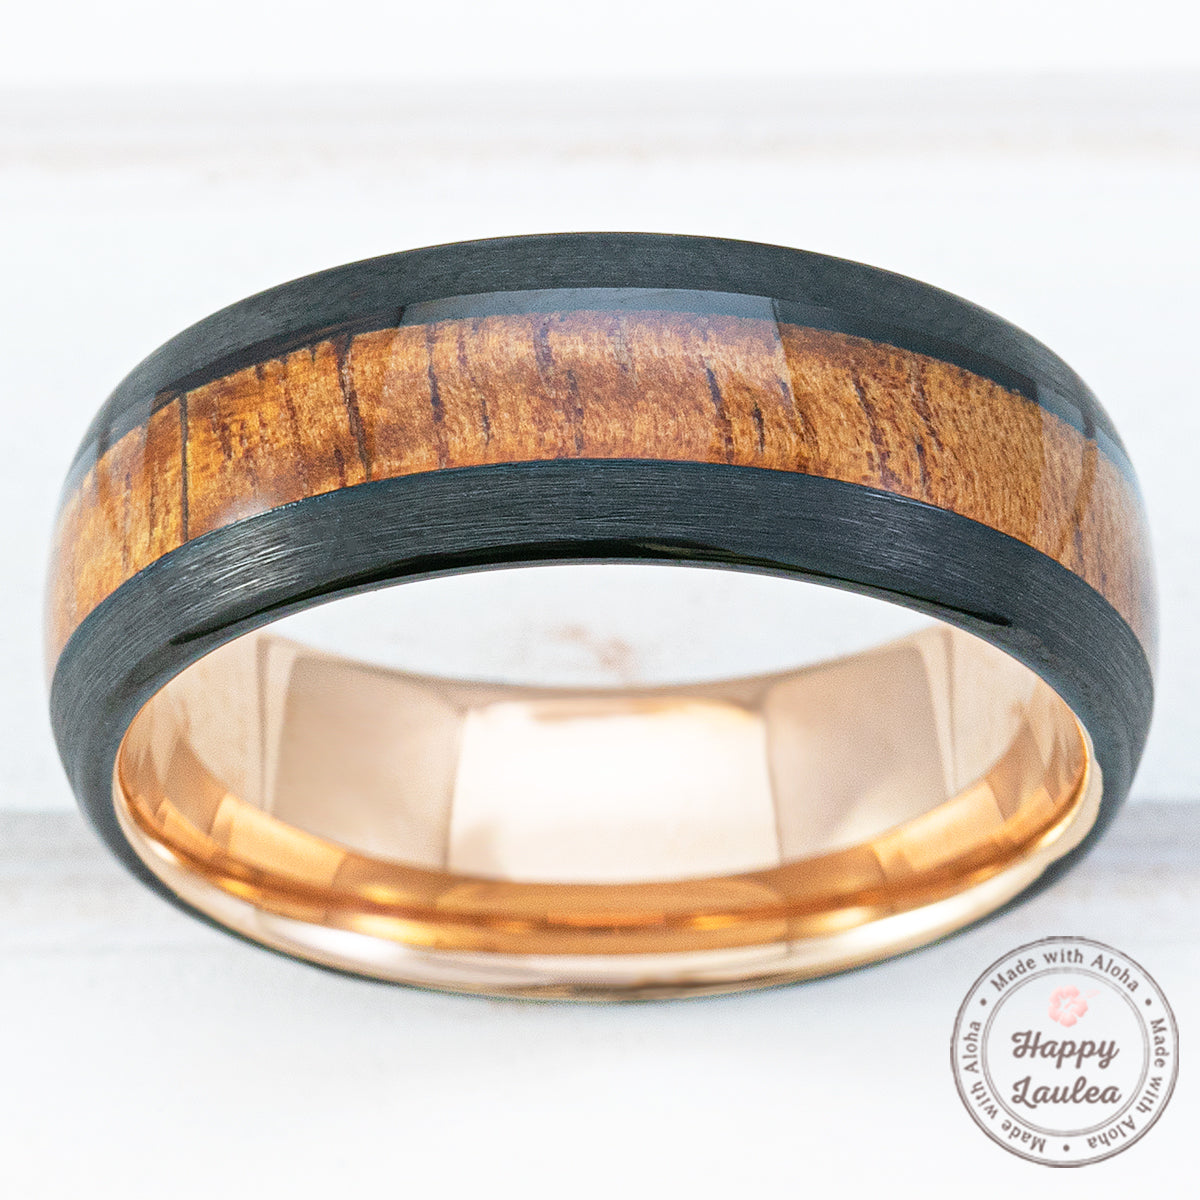 Black & Rose Gold Tungsten Carbide Ring with Hawaiian Koa Wood Inlay - 8mm, Comfort Fitment, Dome Shape